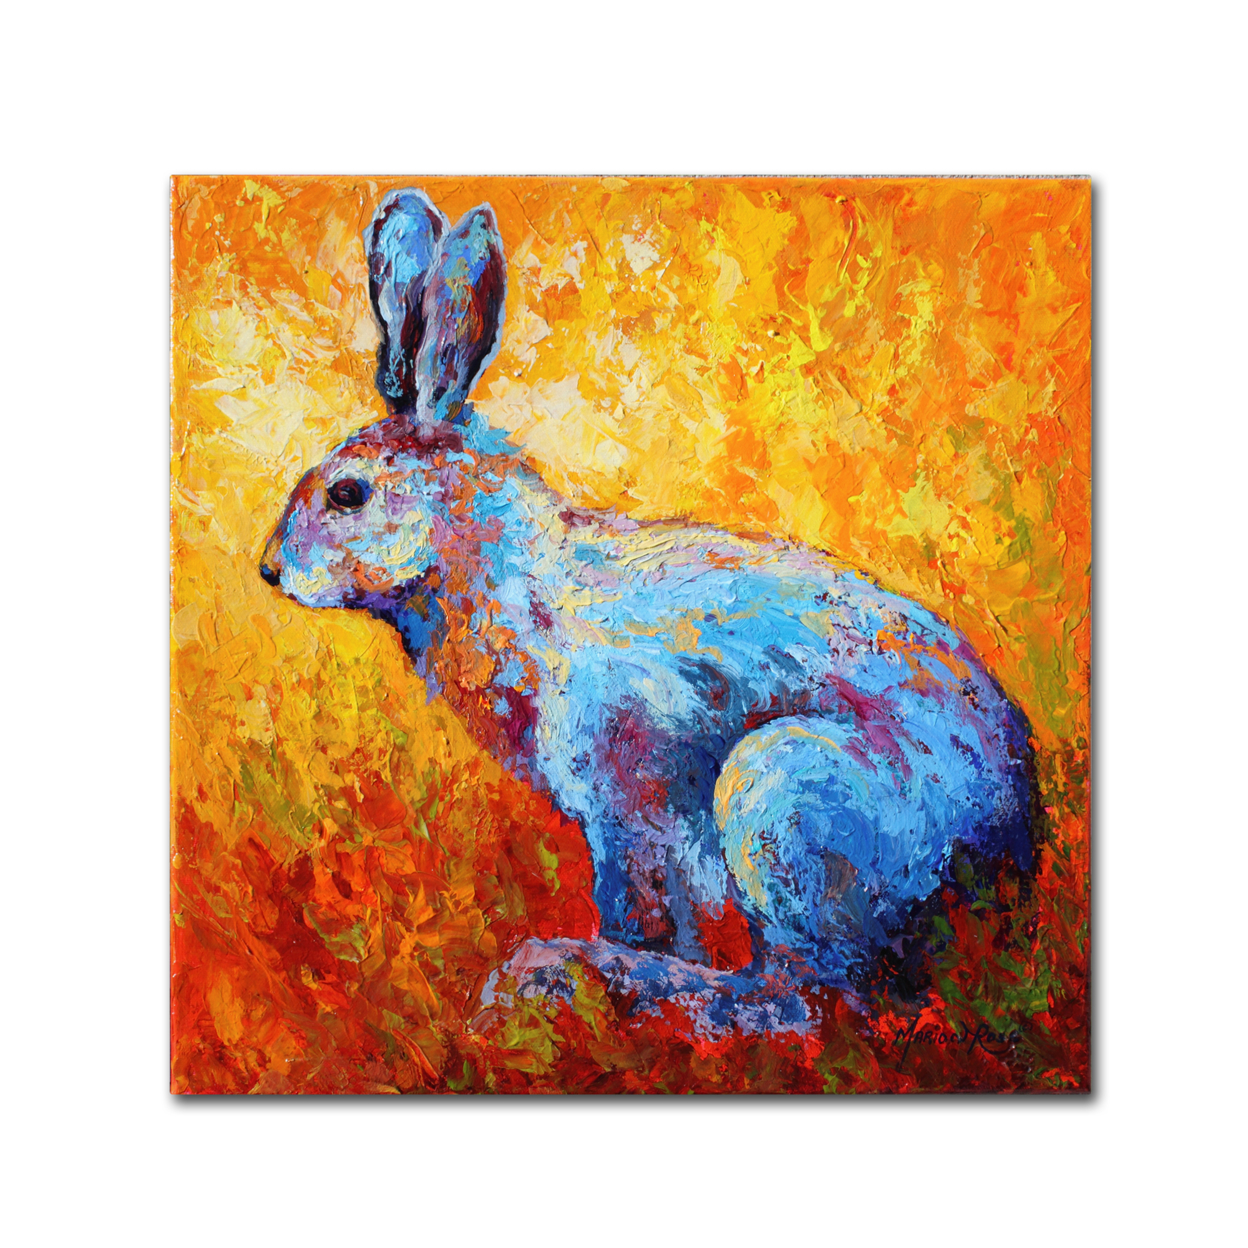 Marion Rose 'Bunnie (krabbit)' Ready To Hang Canvas Art 24 X 24 Inches Made In USA